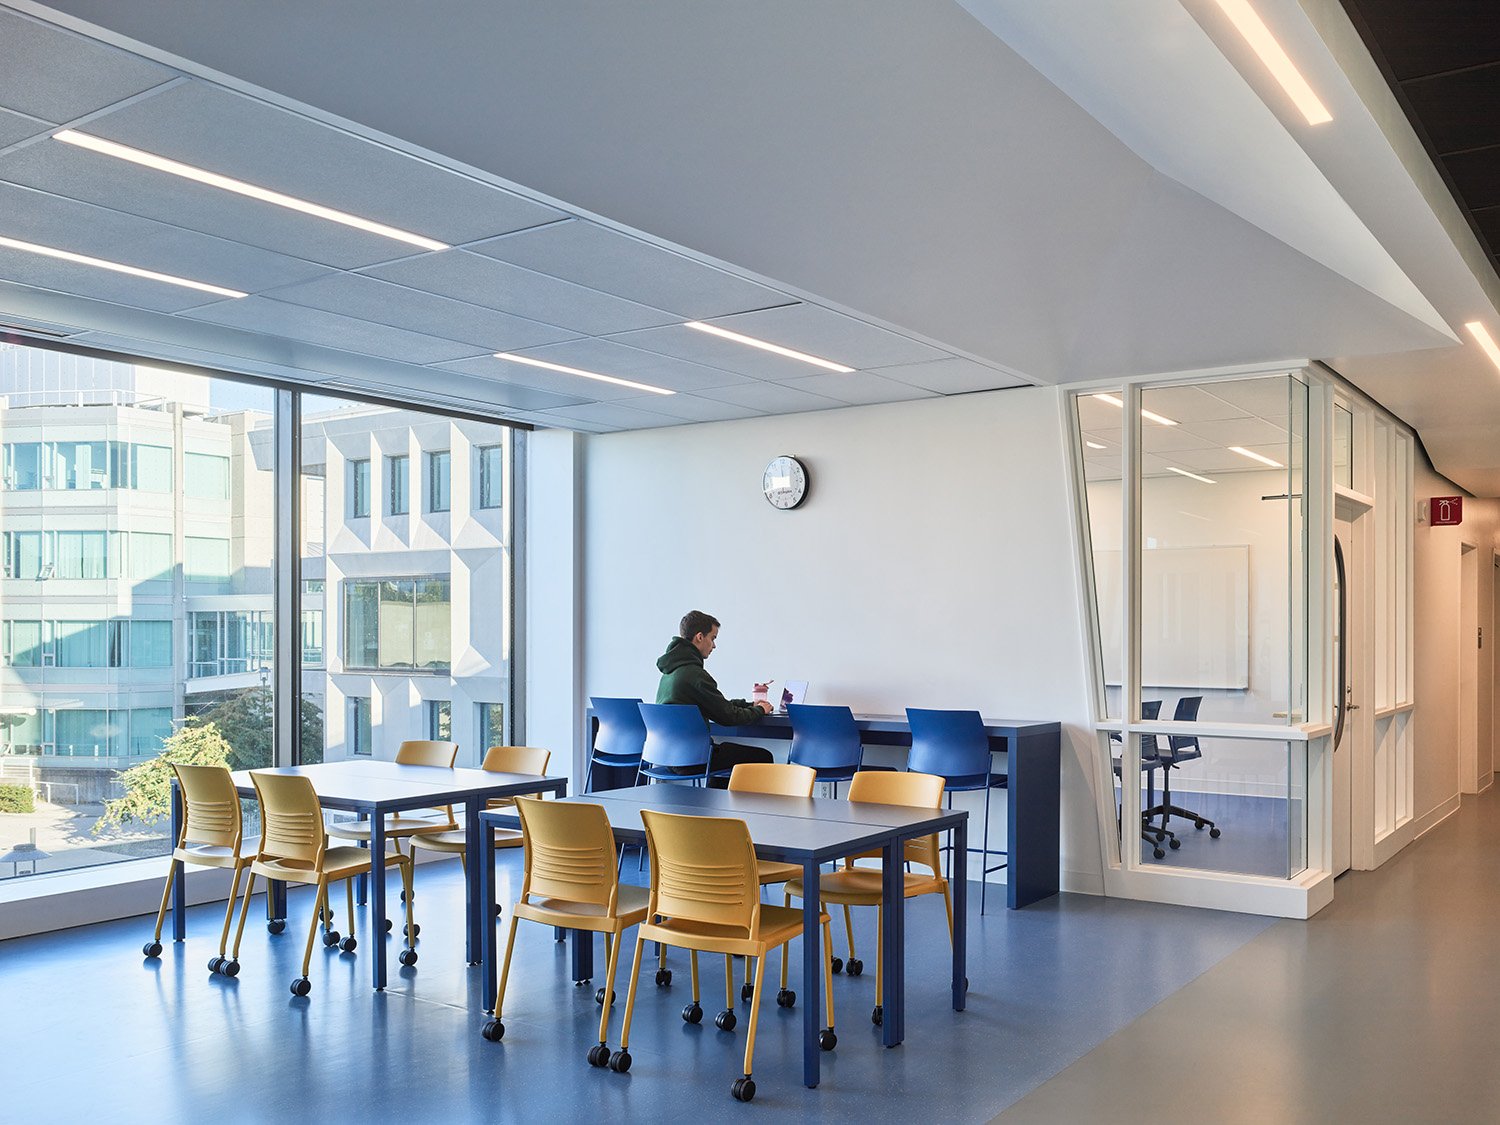 Ample daylighting: Informal Learning Spaces (ILS) that are continuous from the hallways allow for new visibility and a sense of place while bouncing light deep into the floorplate. At least 75% of all regularly occupied floor area achieves a direct line o | Andrew Latreille Photography